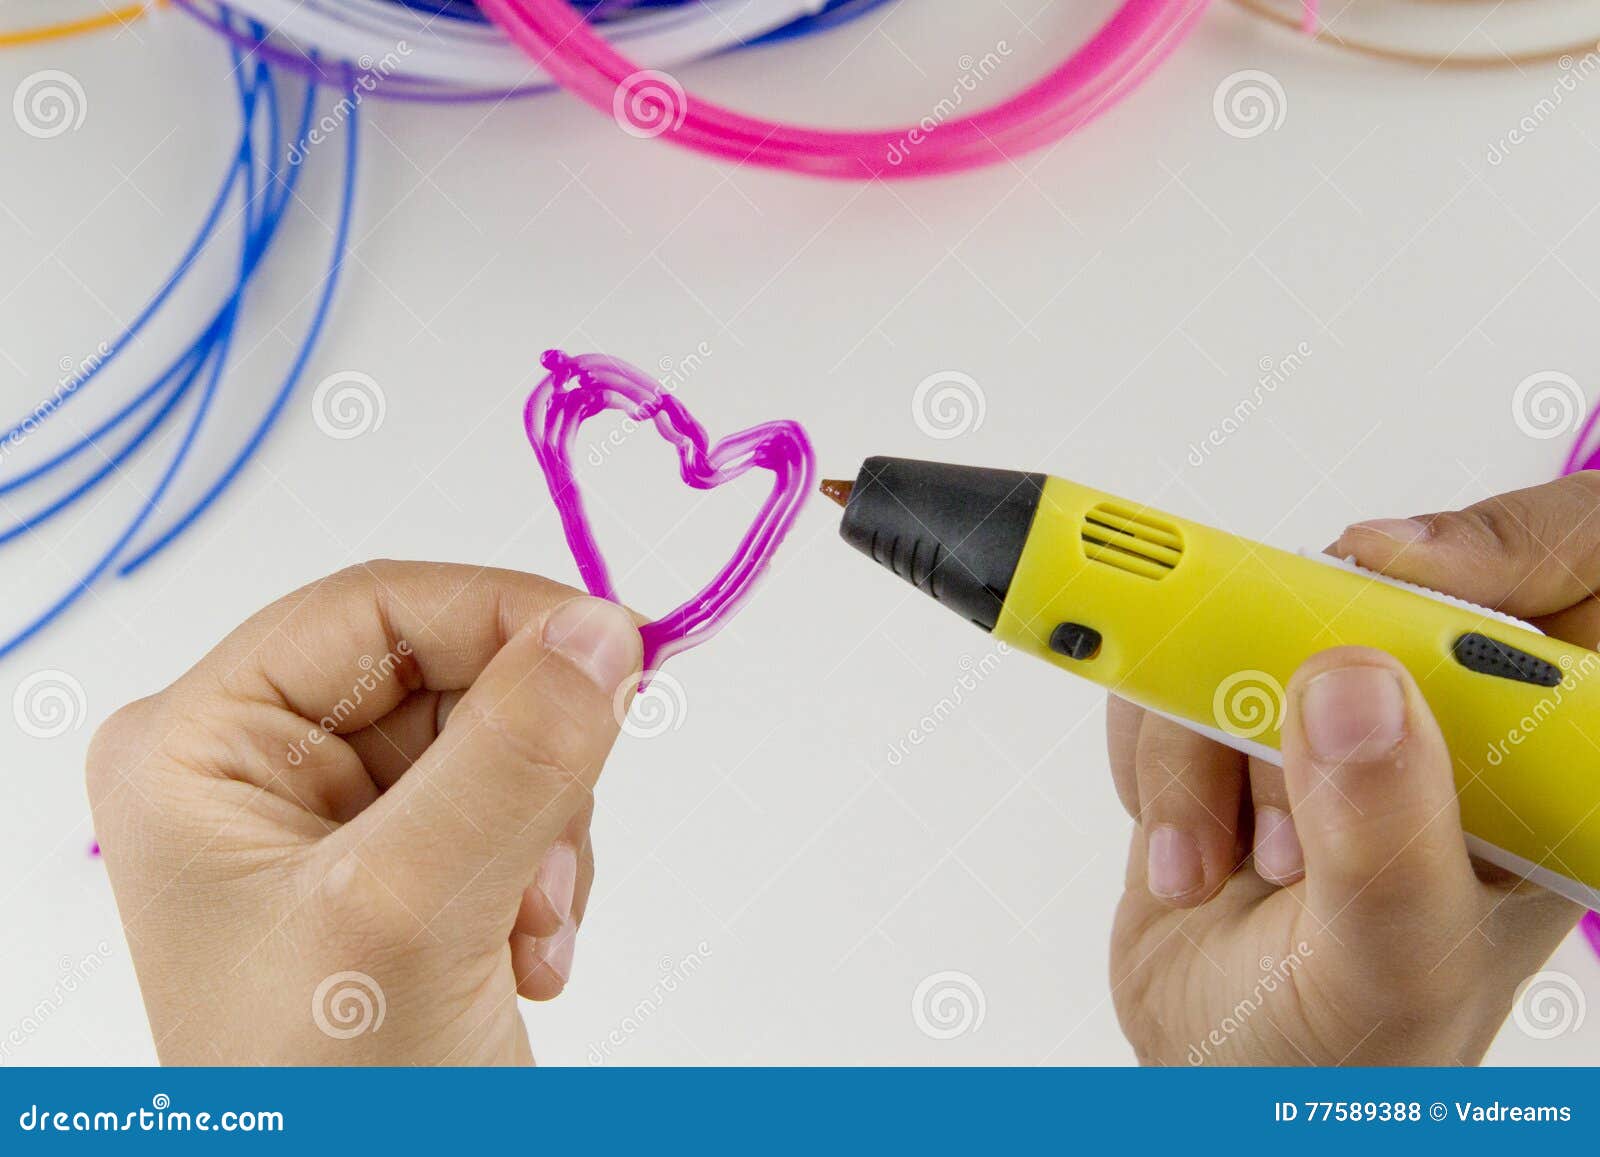 child draw with 3d pen. colourful filaments and white background